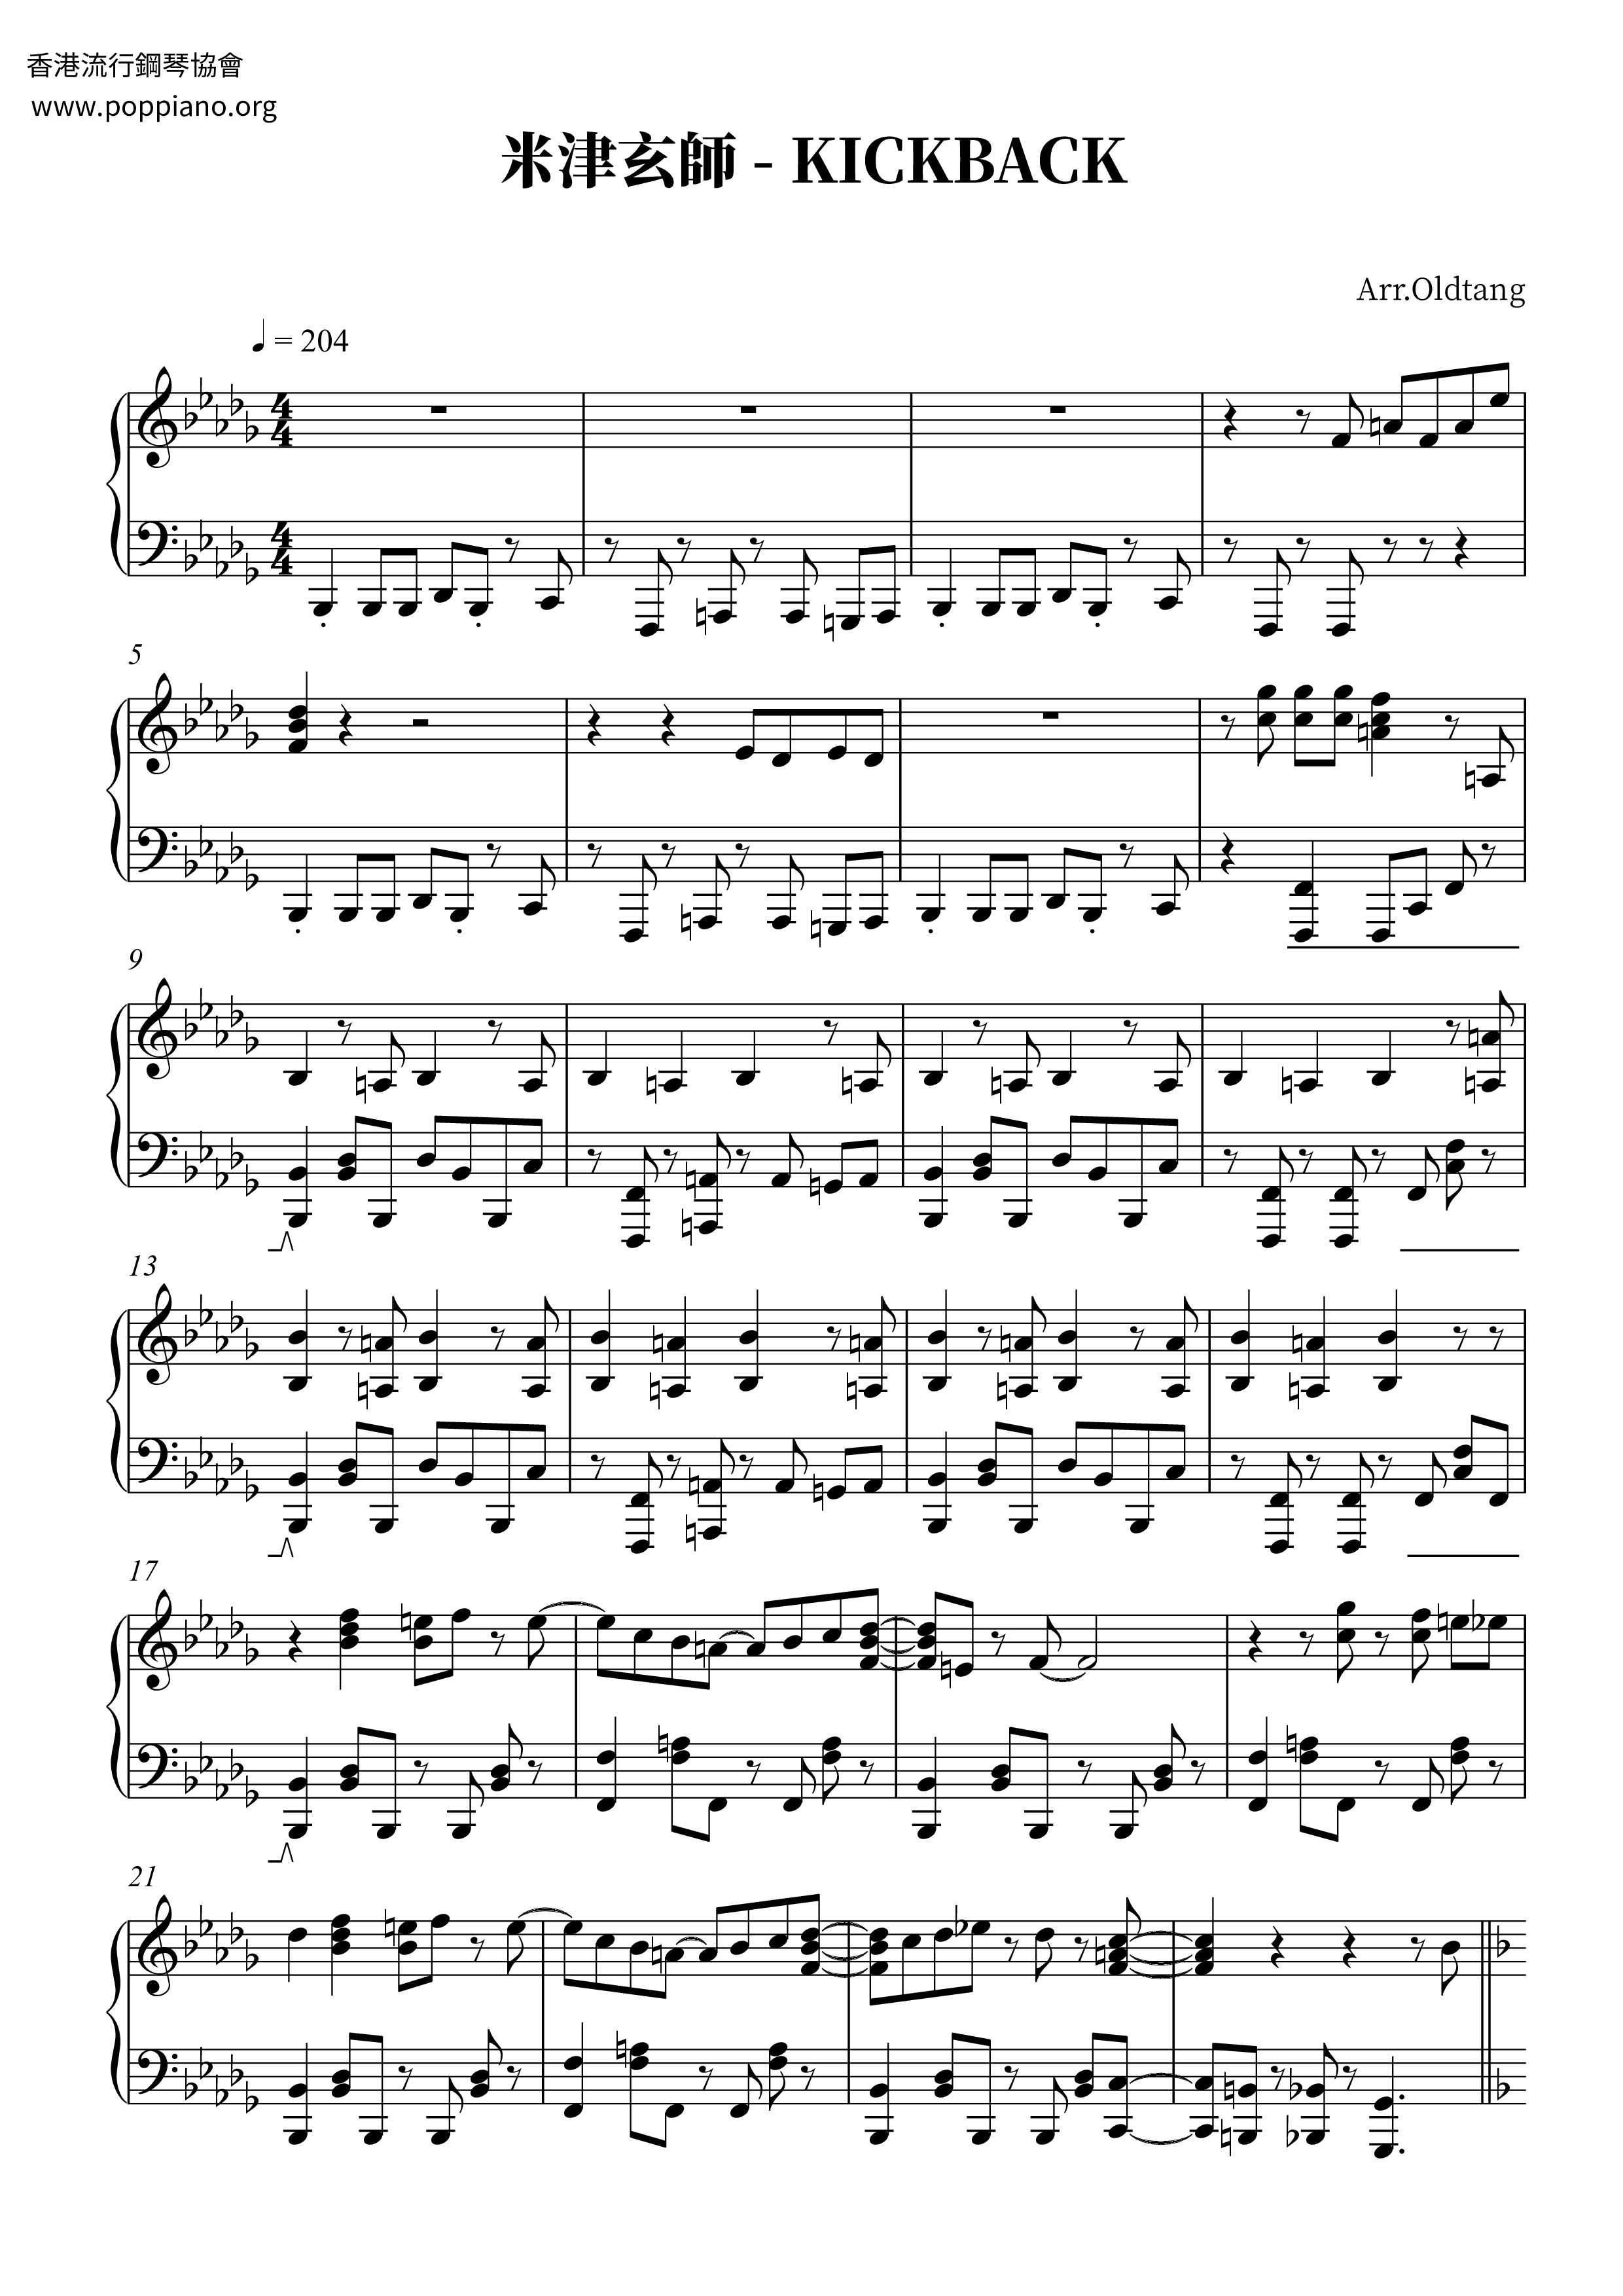 KICK BACK: Full Version, Chainsaw Man OP (Chaotic Piano Solo) Sheet music  for Piano (Solo)